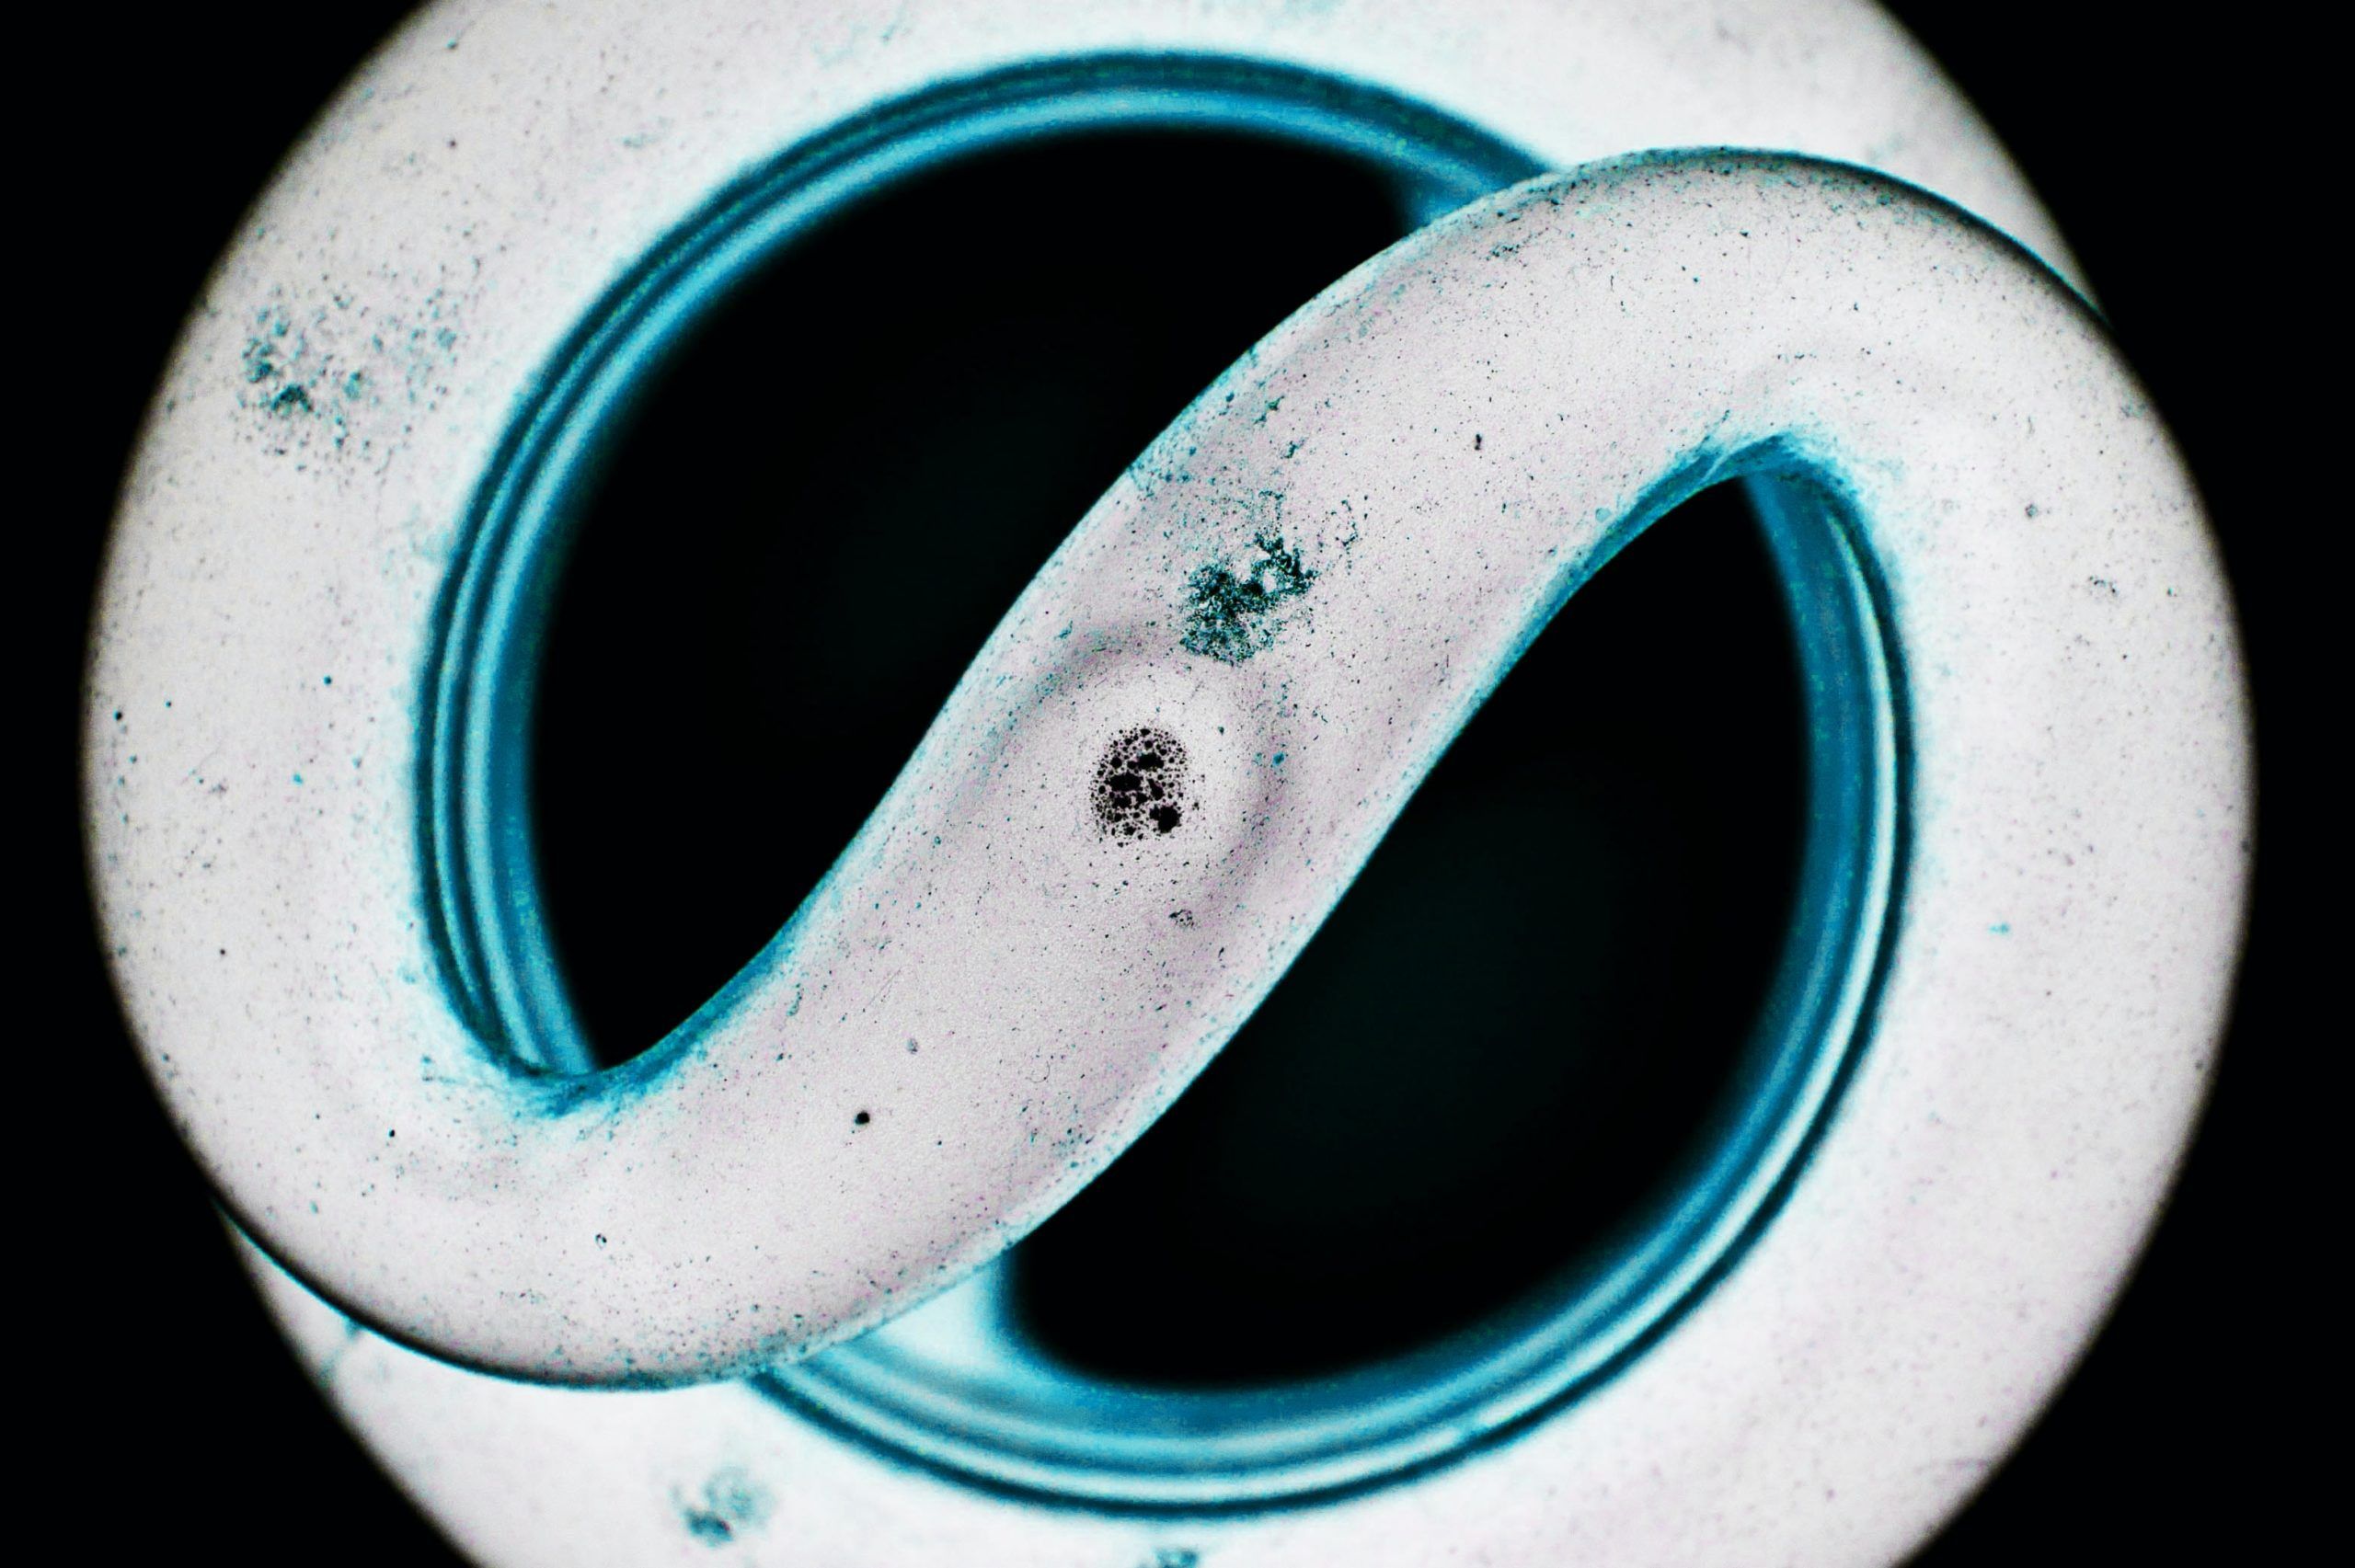 An image of a blue and white spiral on a black background.